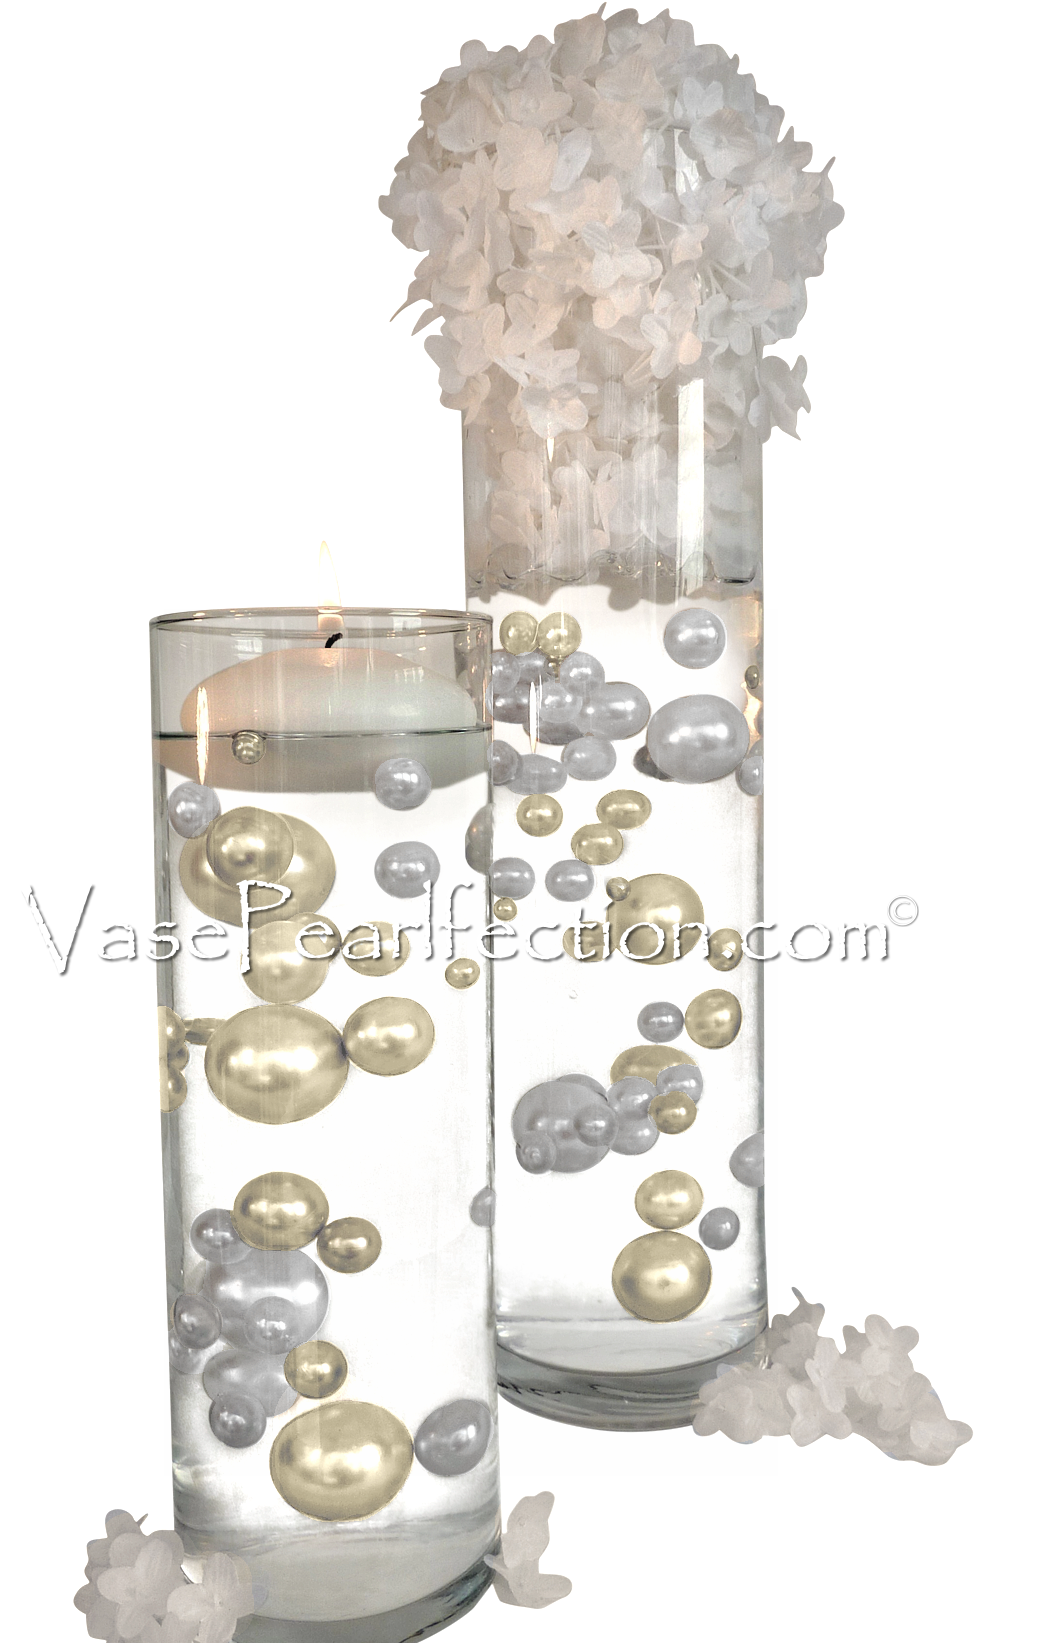 Ivory & White Pearls for Vase Decorations and Table Scatter – Floating  Pearls